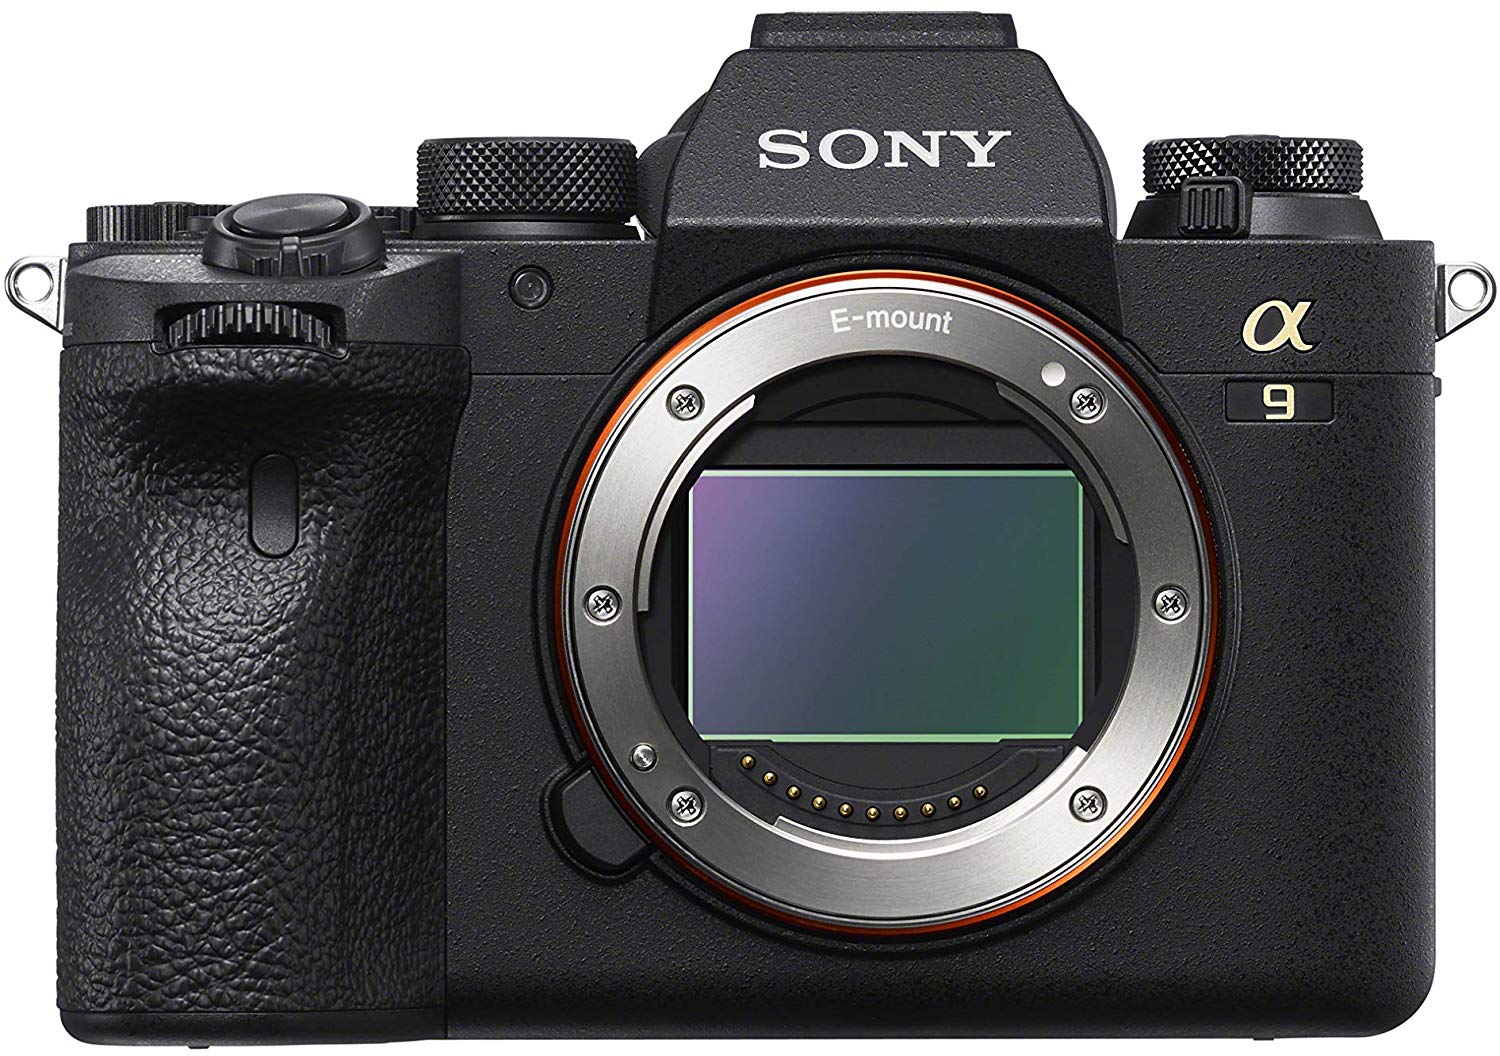 Sony a9 II Mirrorless Camera: 24.2MP Full Frame Mirrorless Interchangeable Lens Digital Camera with Continuous AF/AE, 4K Video and Built-in